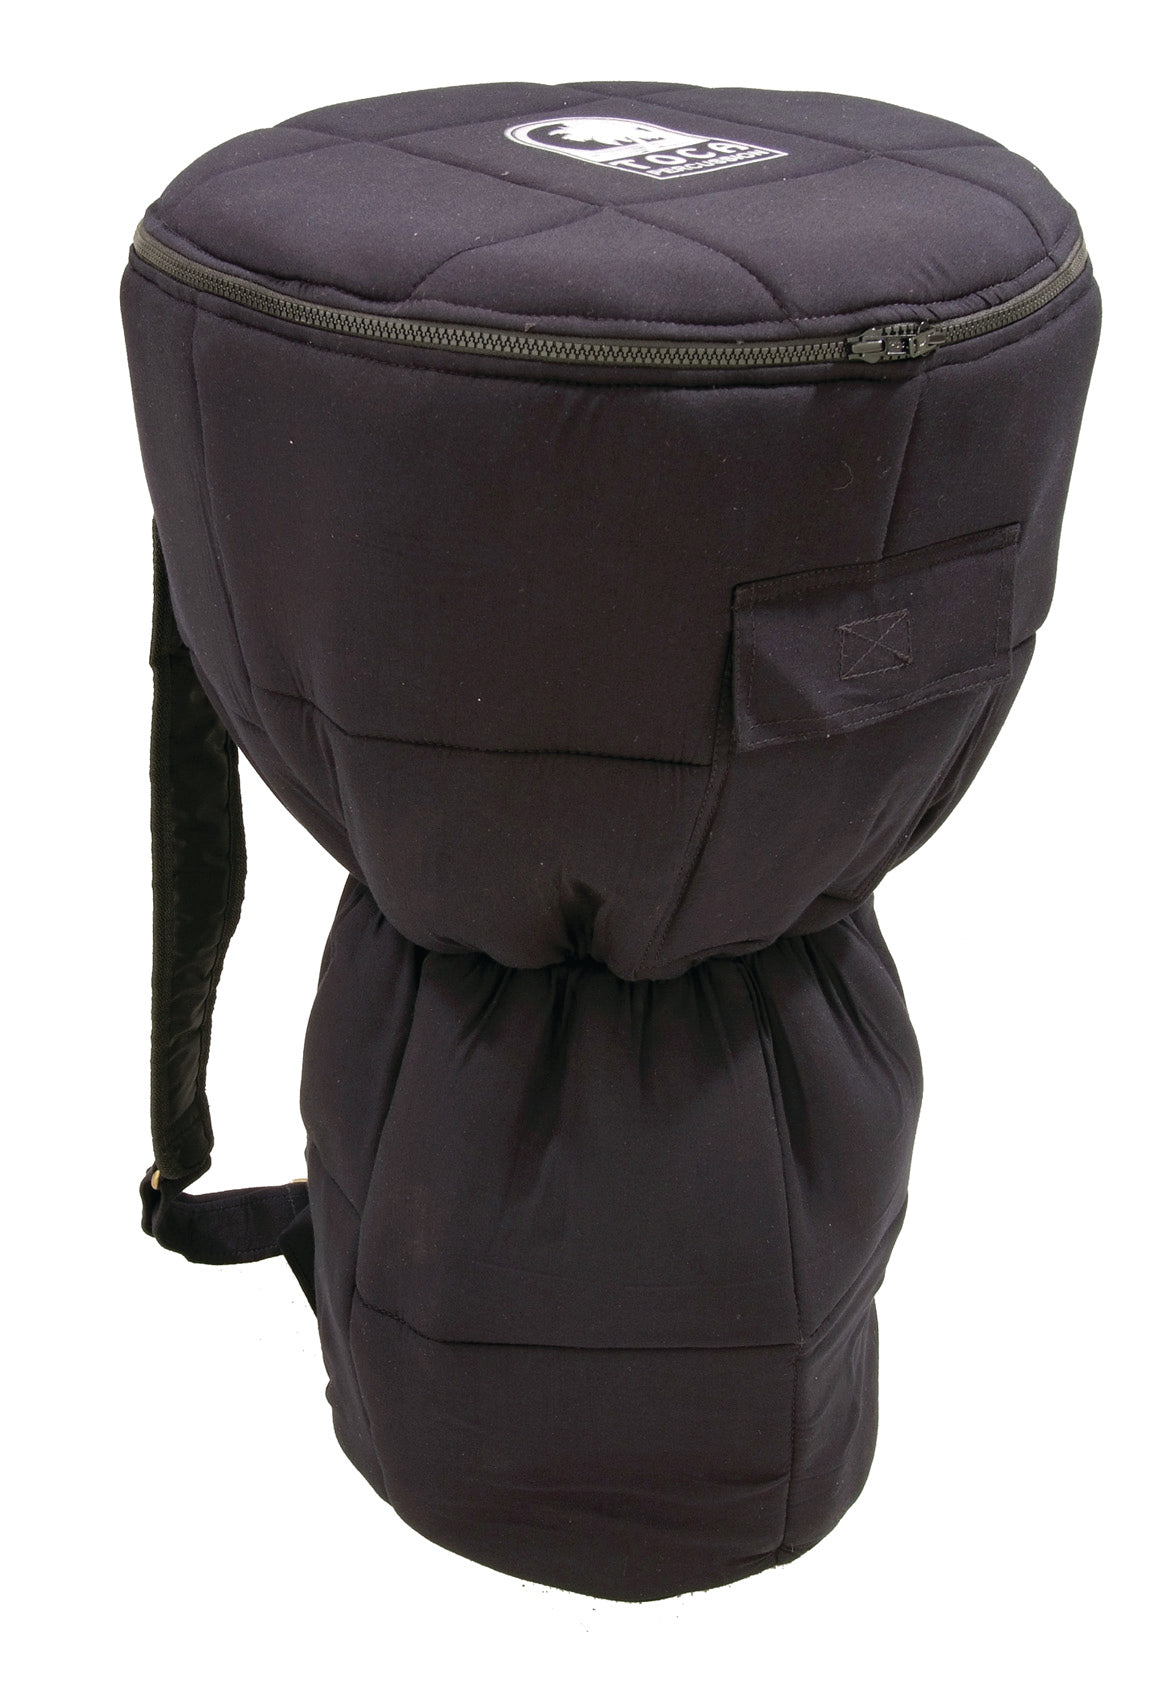 Toca 12" Djembe Bag with Carry All Strap Kit